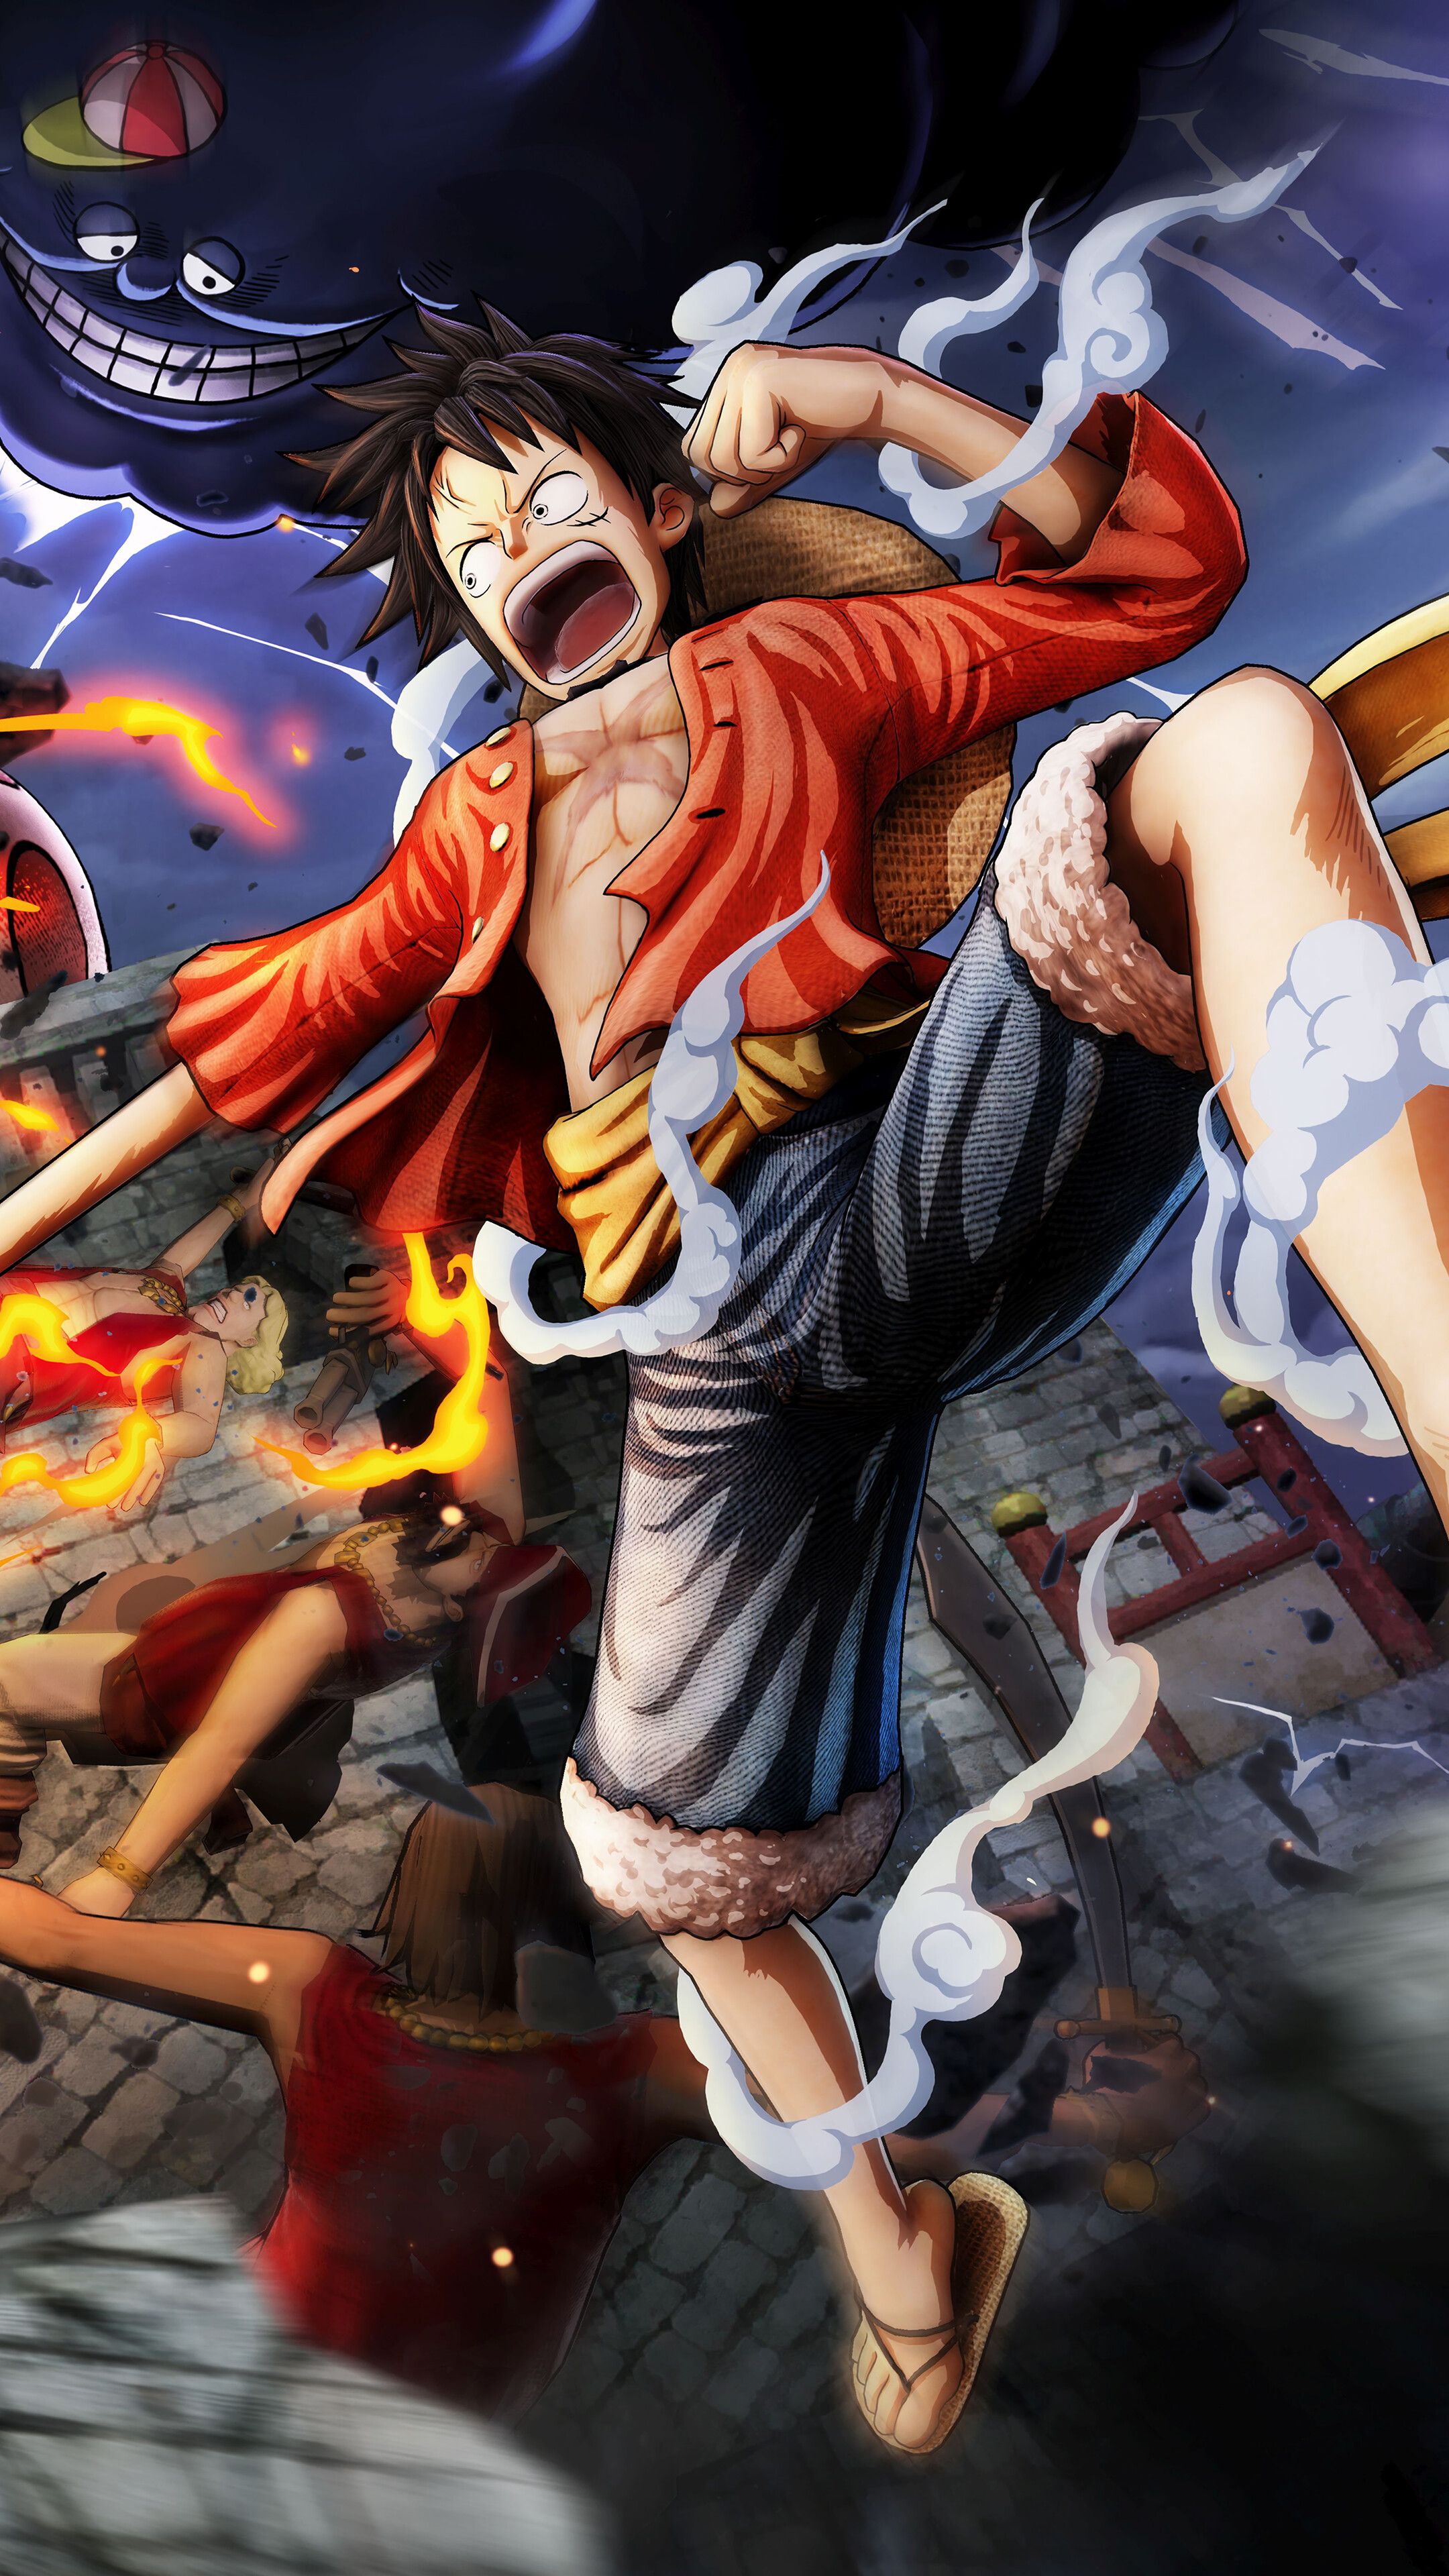 2160x3840 One Piece Wallpaper 4k For Iphone